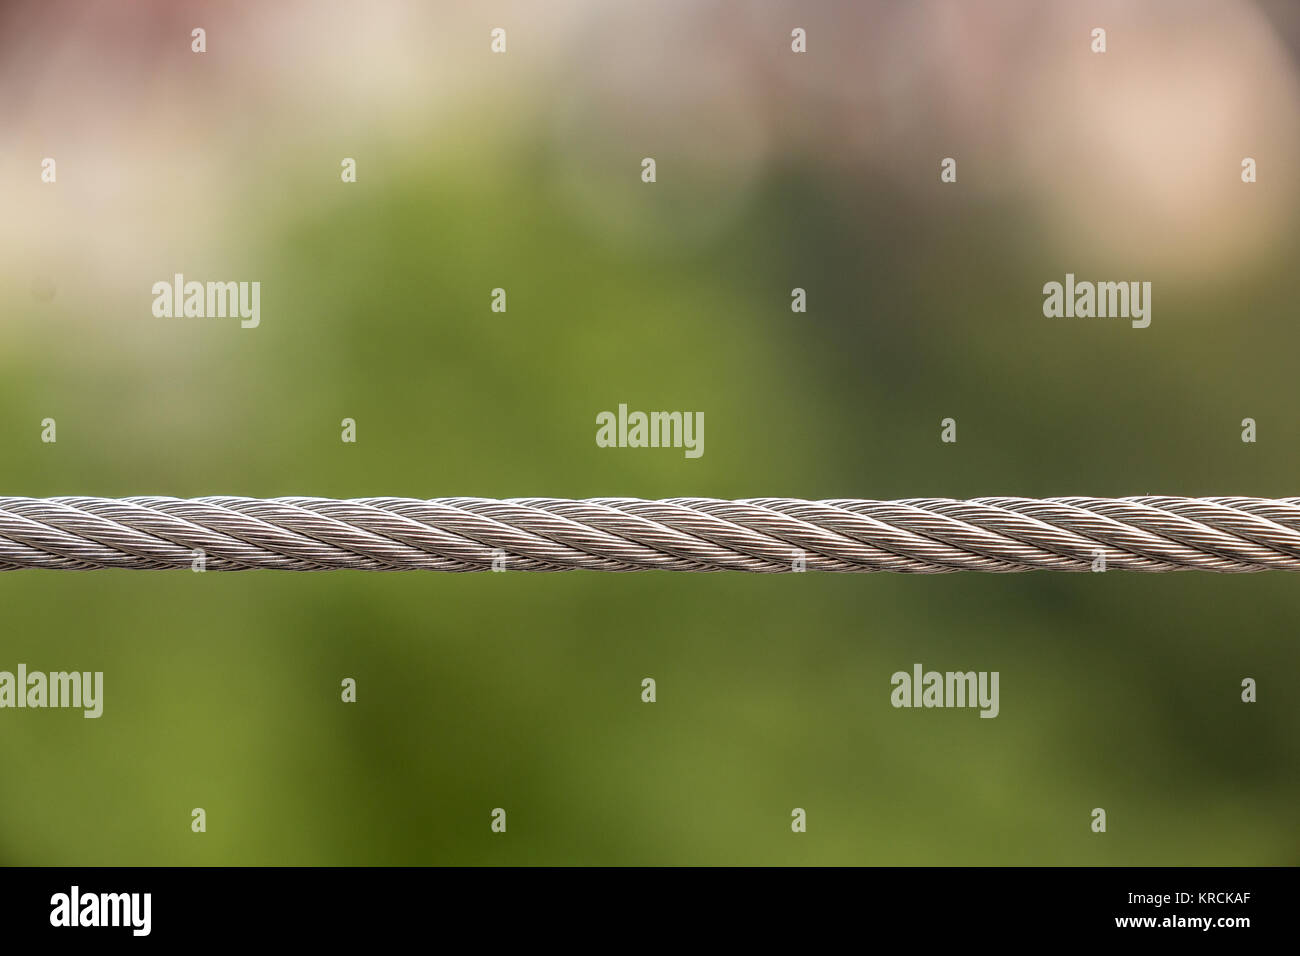 Strong steel cable and green blurred background Stock Photo